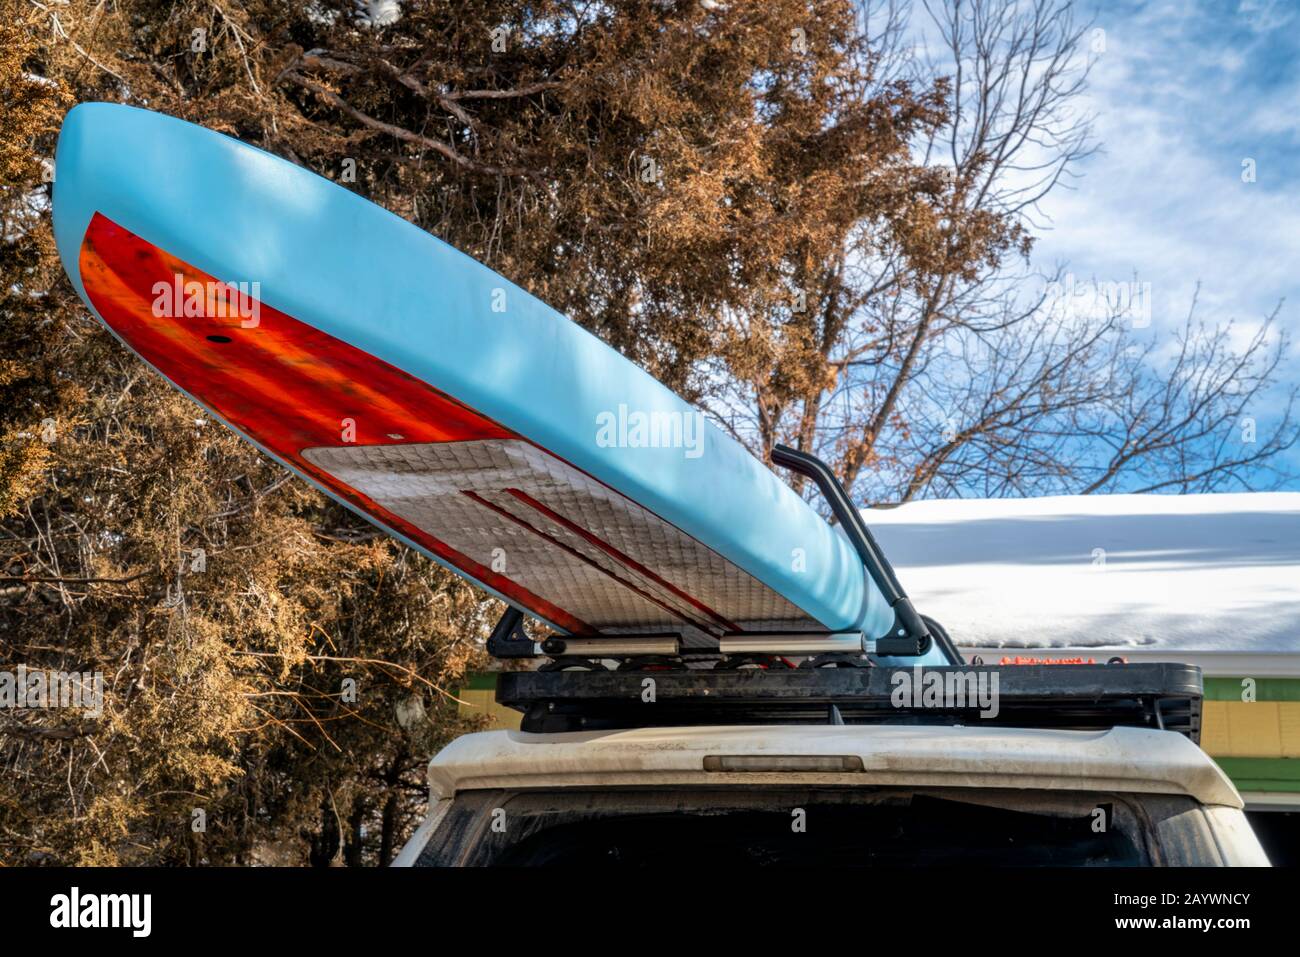 Unlimited racing stand up paddleboard on roof racks of SUV car in a driveway, both dirty and muddy after long winter travel. Stock Photo